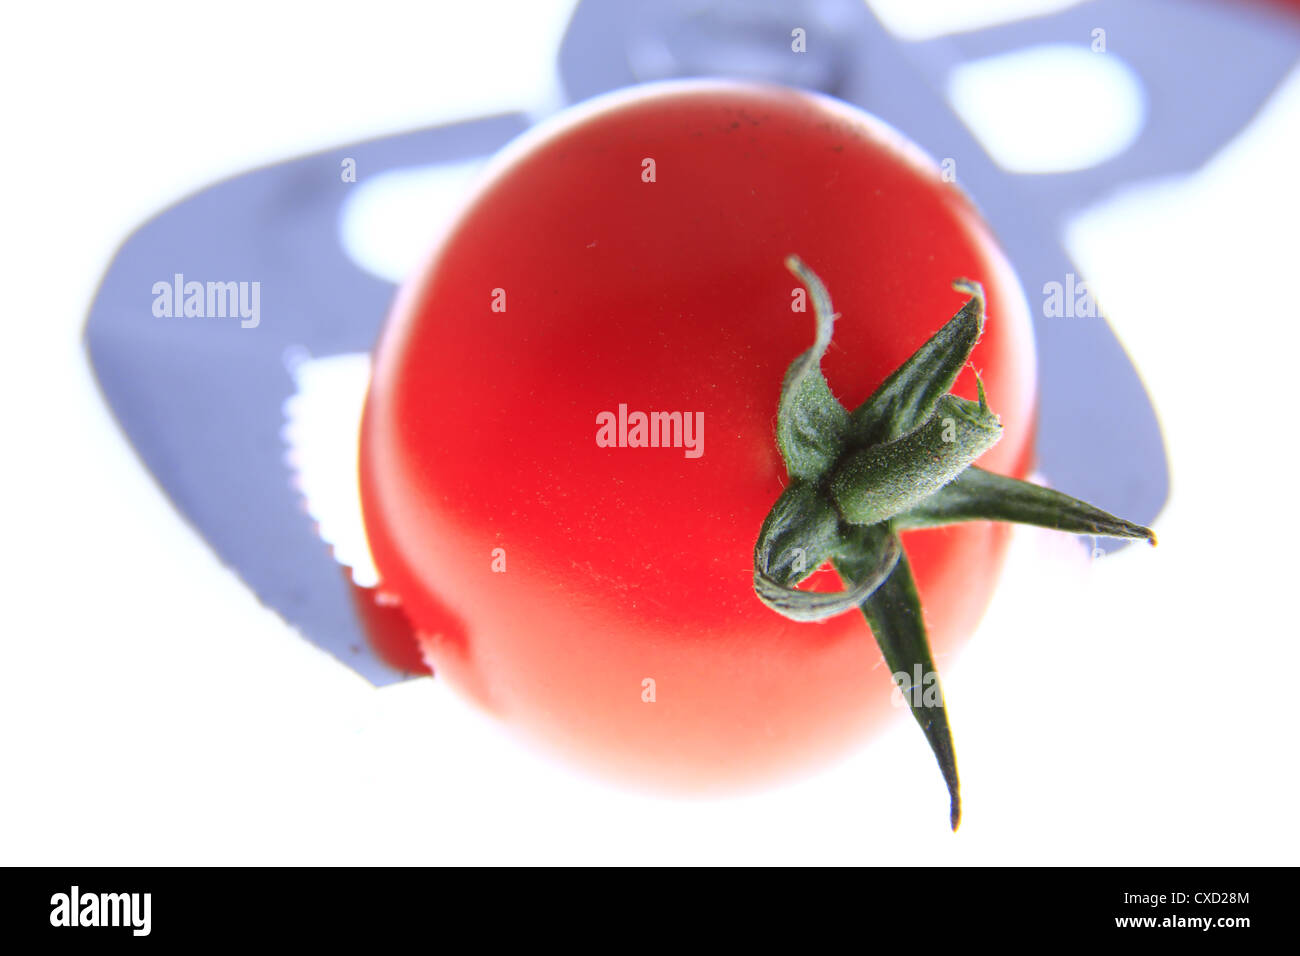 Tomato in the forceps Stock Photo